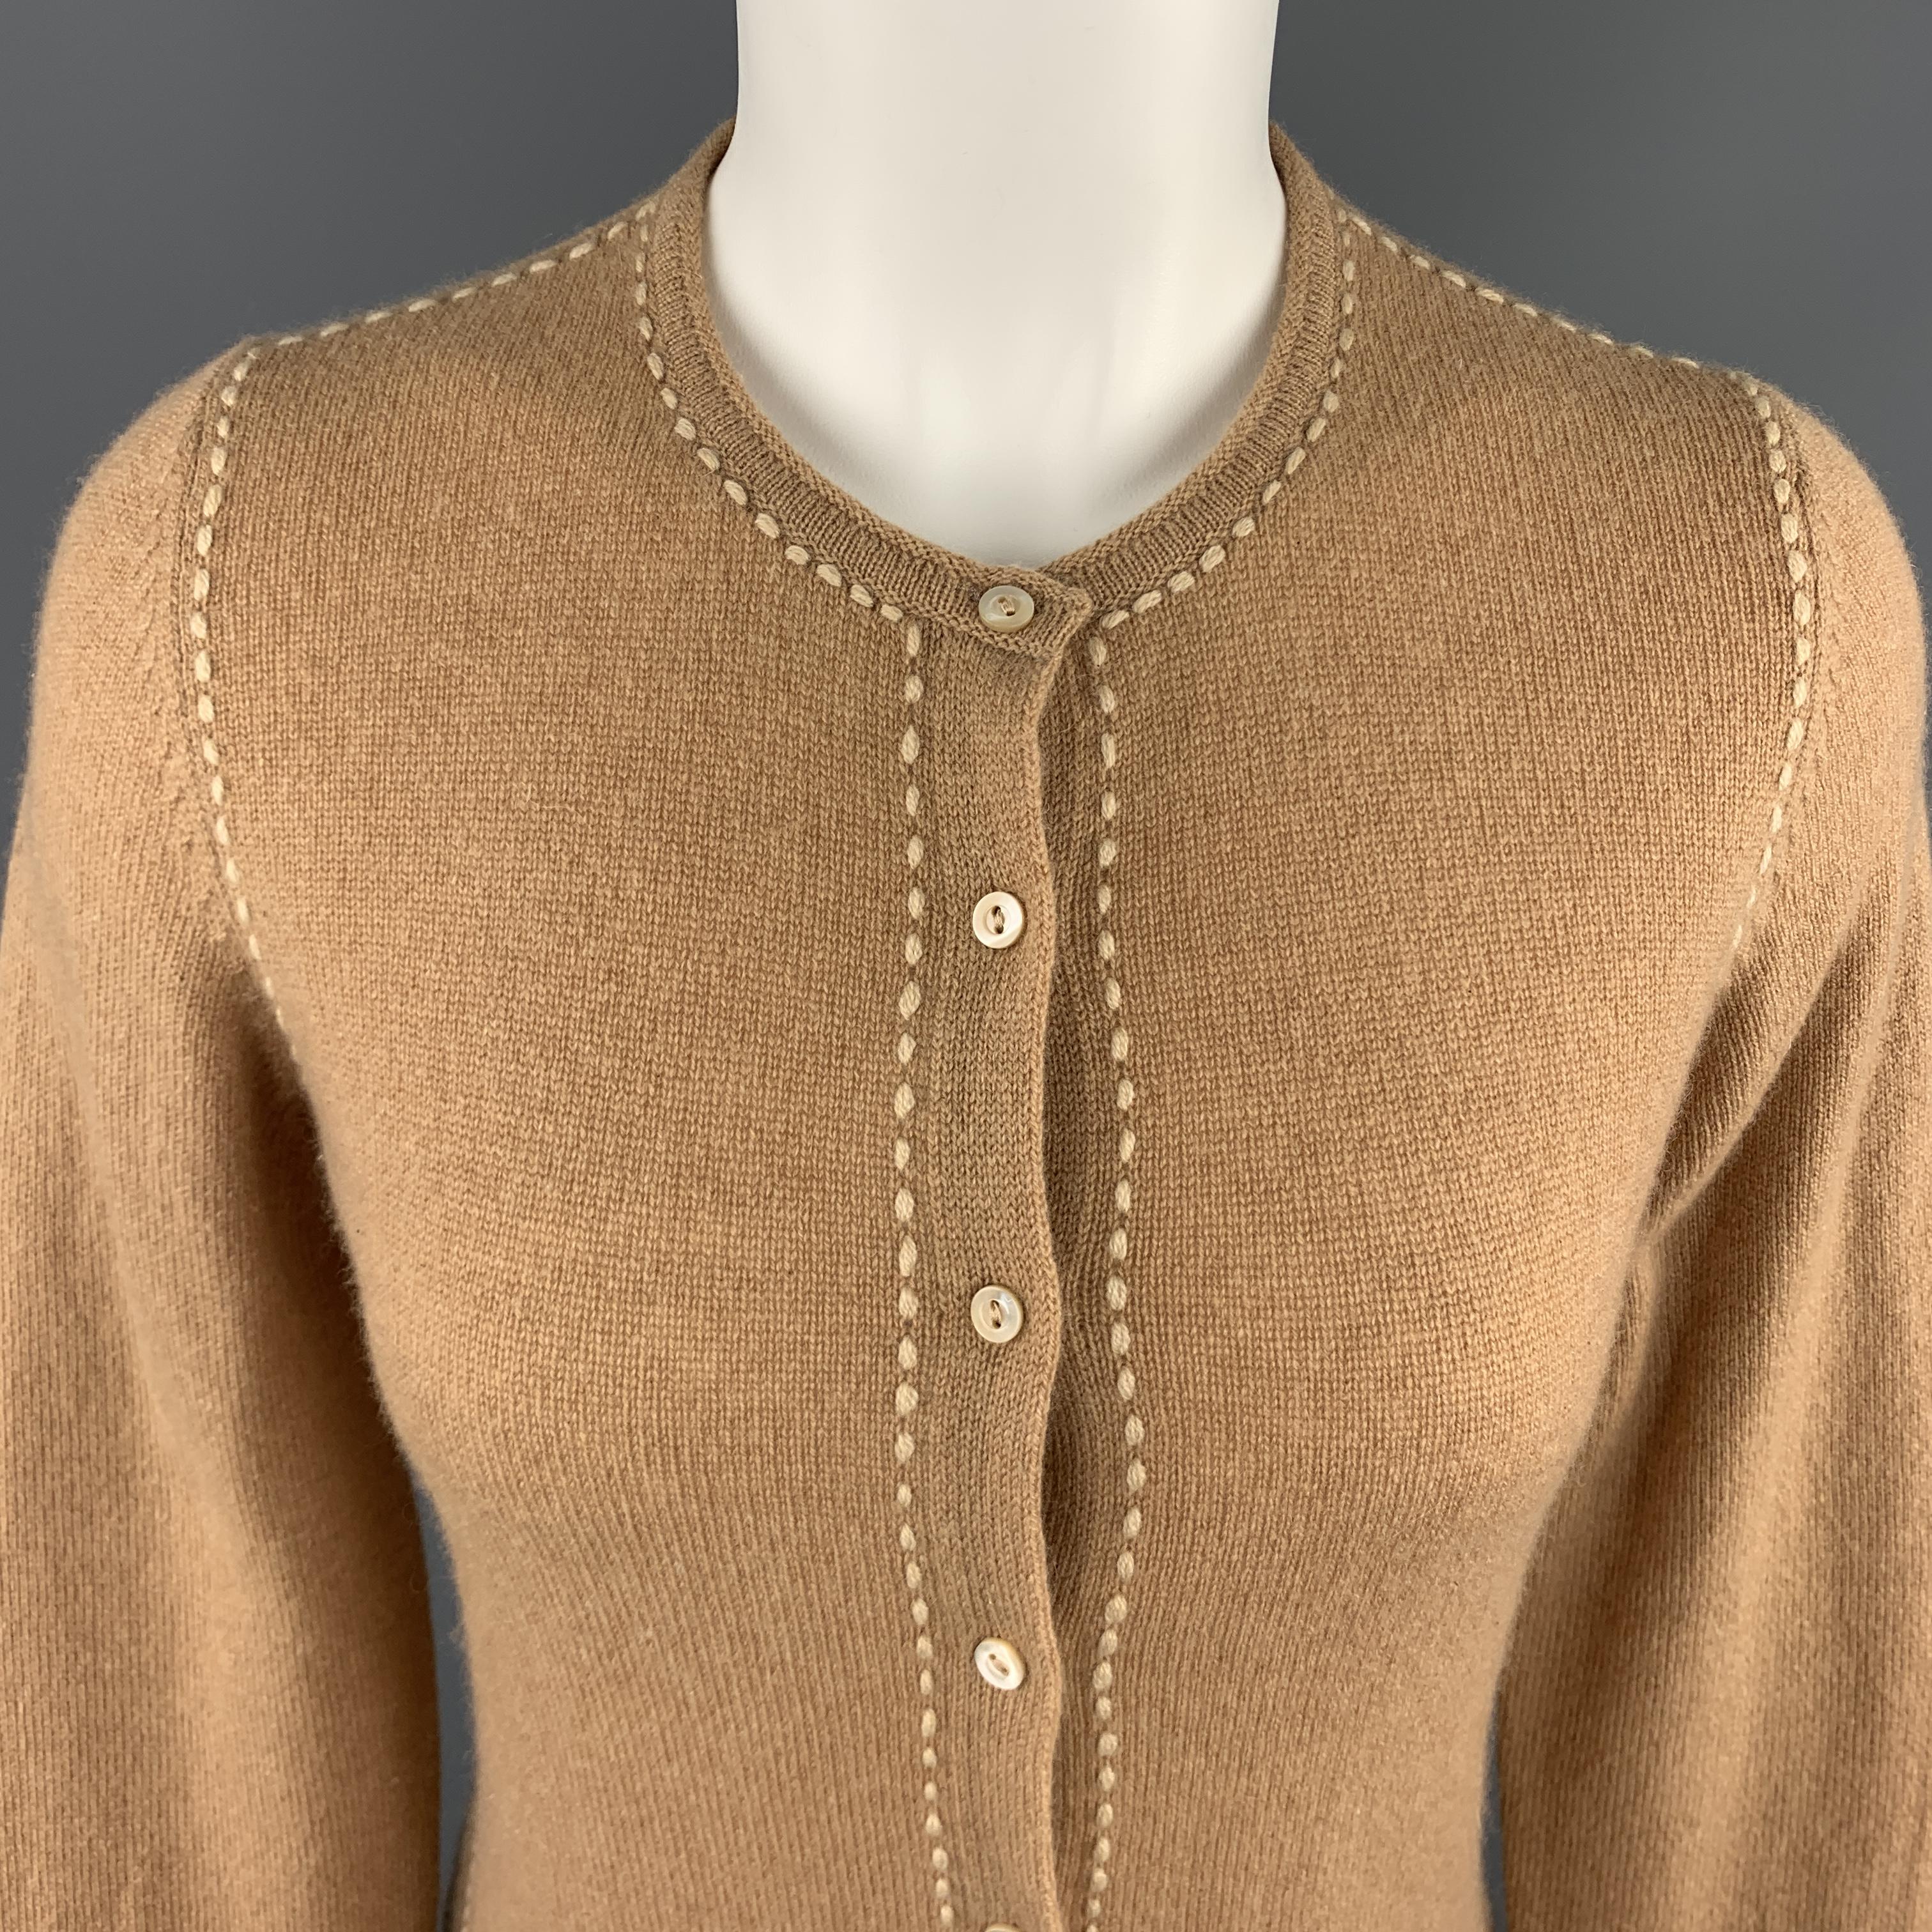 LORO PIANA cardigan comes in tan cashmere with a button front and contrast stitching. Matching Vest available separately. Made in Italy.

Excellent Pre-Owned Condition.
Marked: IT 44

Measurements:

Shoulder: 14 in.
Bust: 34 in.
Sleeve: 23